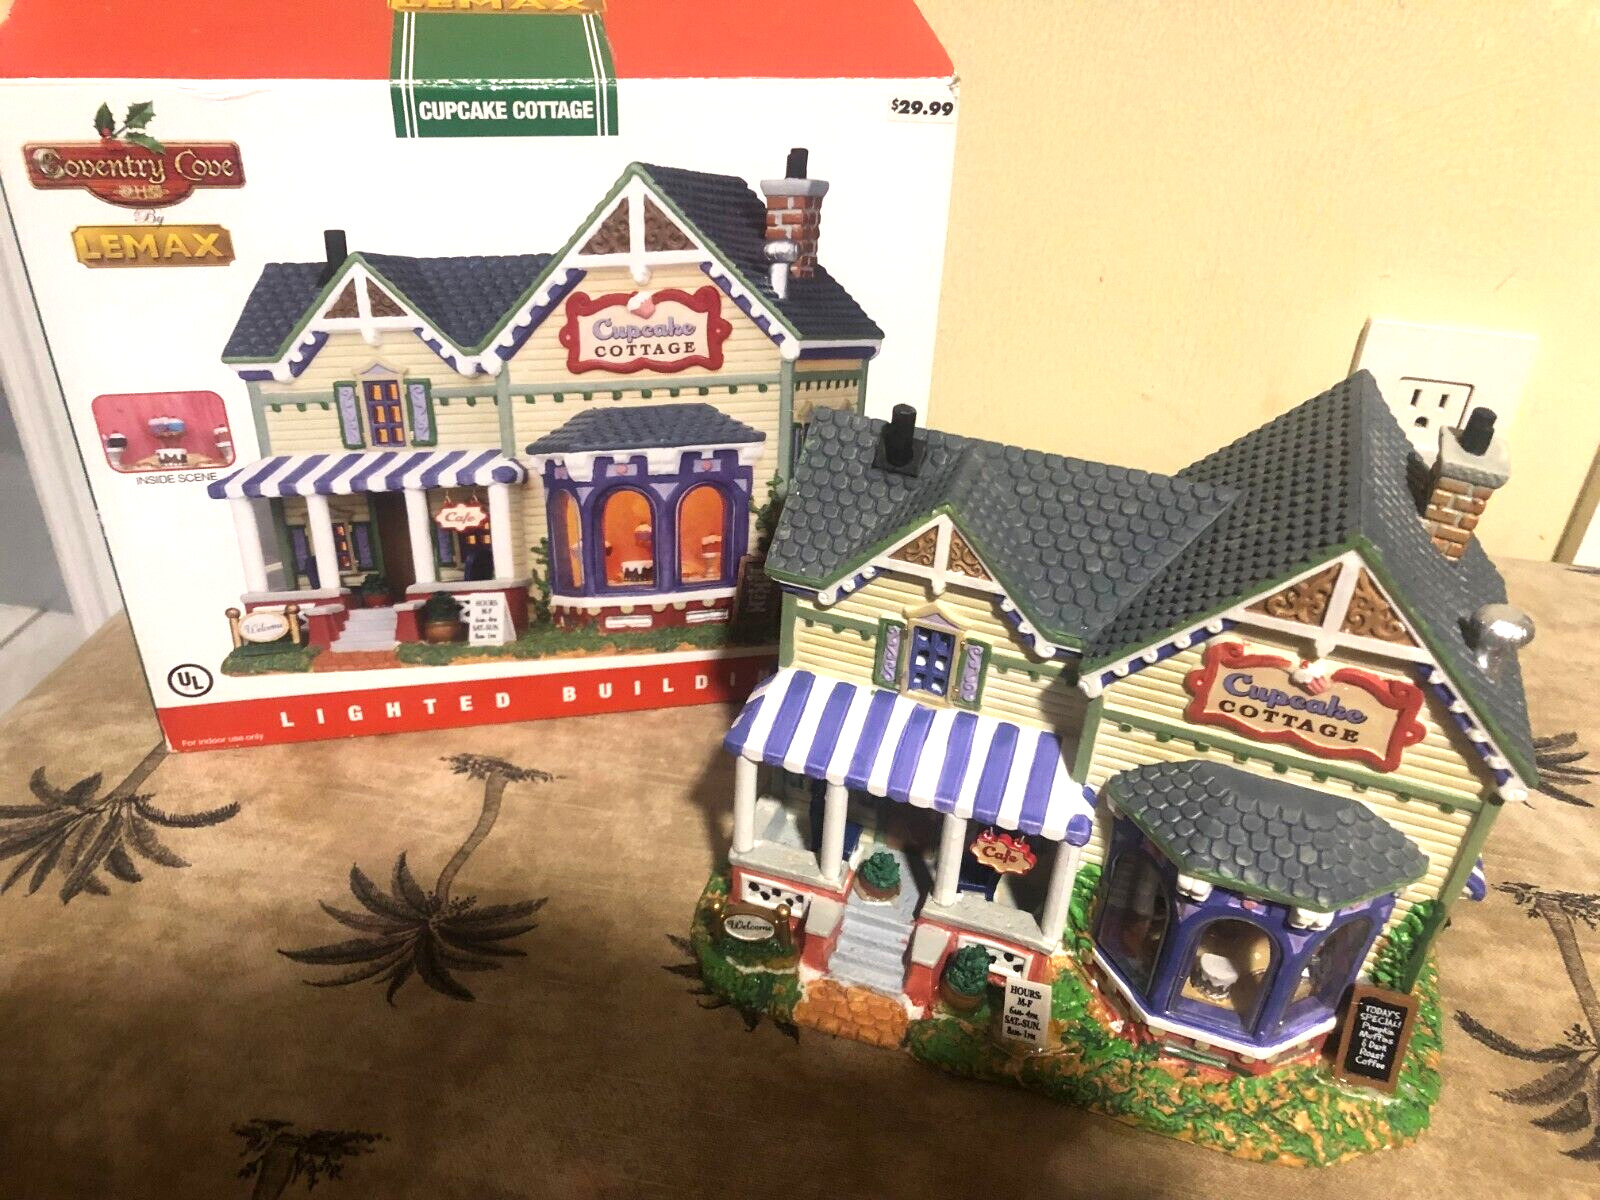 LEMAX COVENTRY COVE CUPCAKE COTTAGE LIGHTED BUILDING 05096